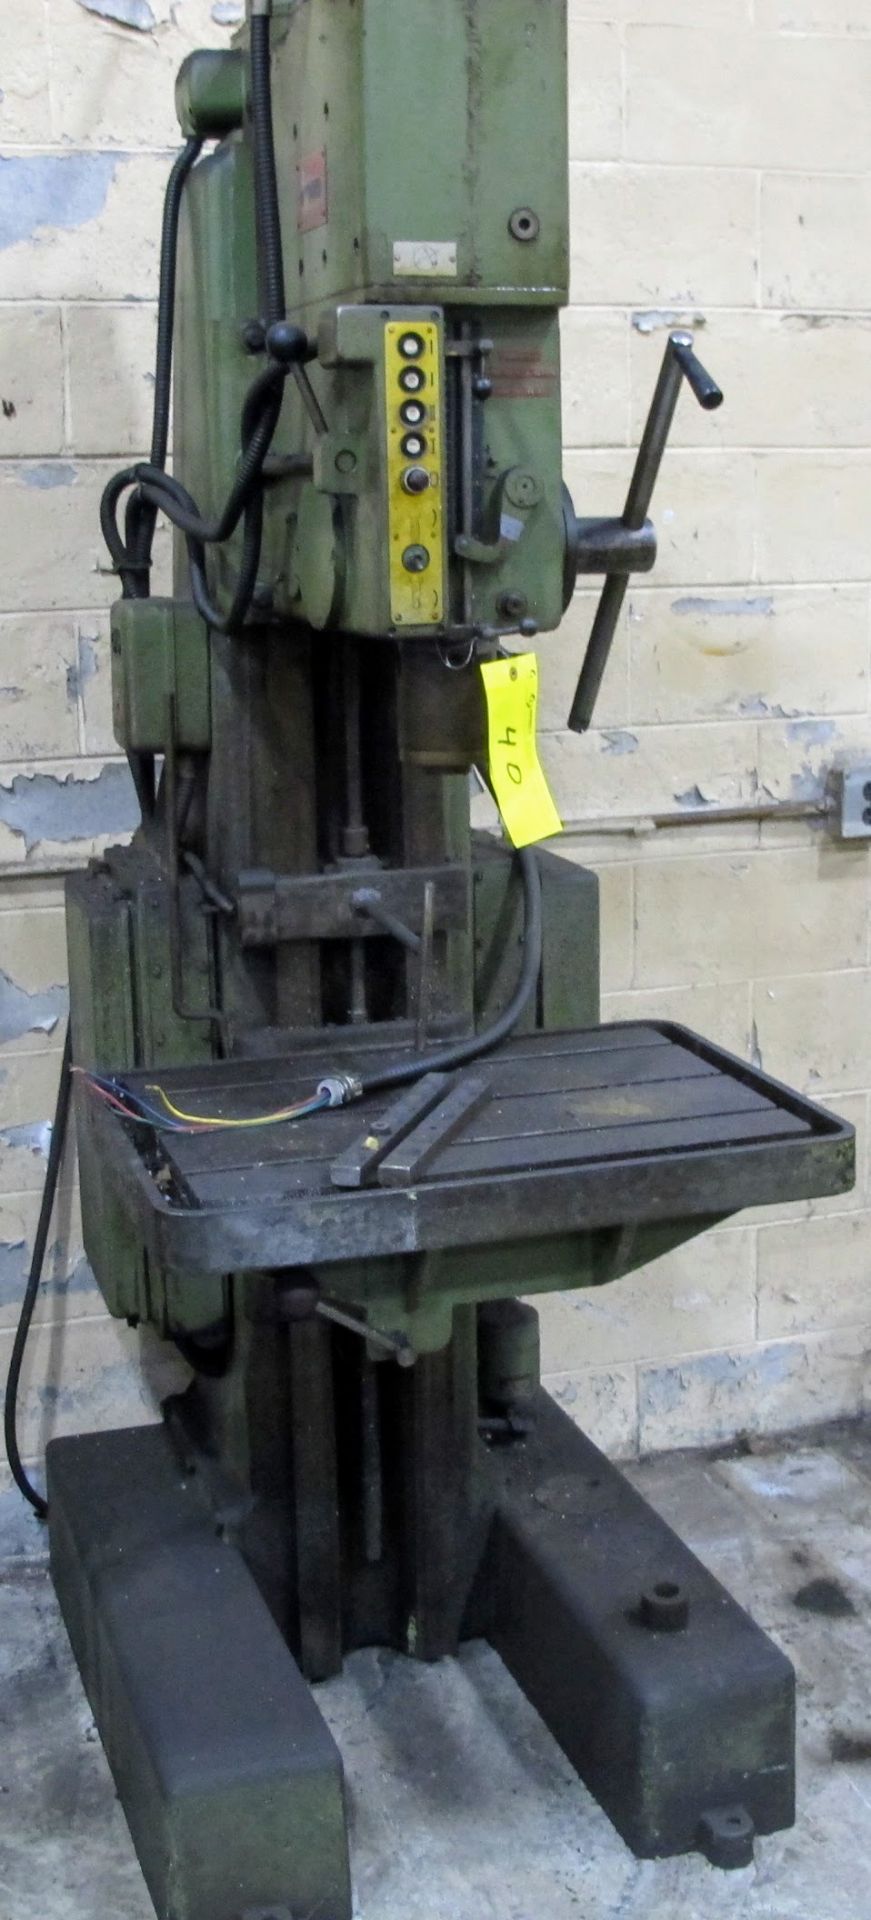 ARBOGA MASCHINEN M3/4/7 DRILL PRESS, 1 1/4" BORES, 60V, 28" X 20" TABLE, 63 TO 800 RPM, S/N 16225 - Image 2 of 5